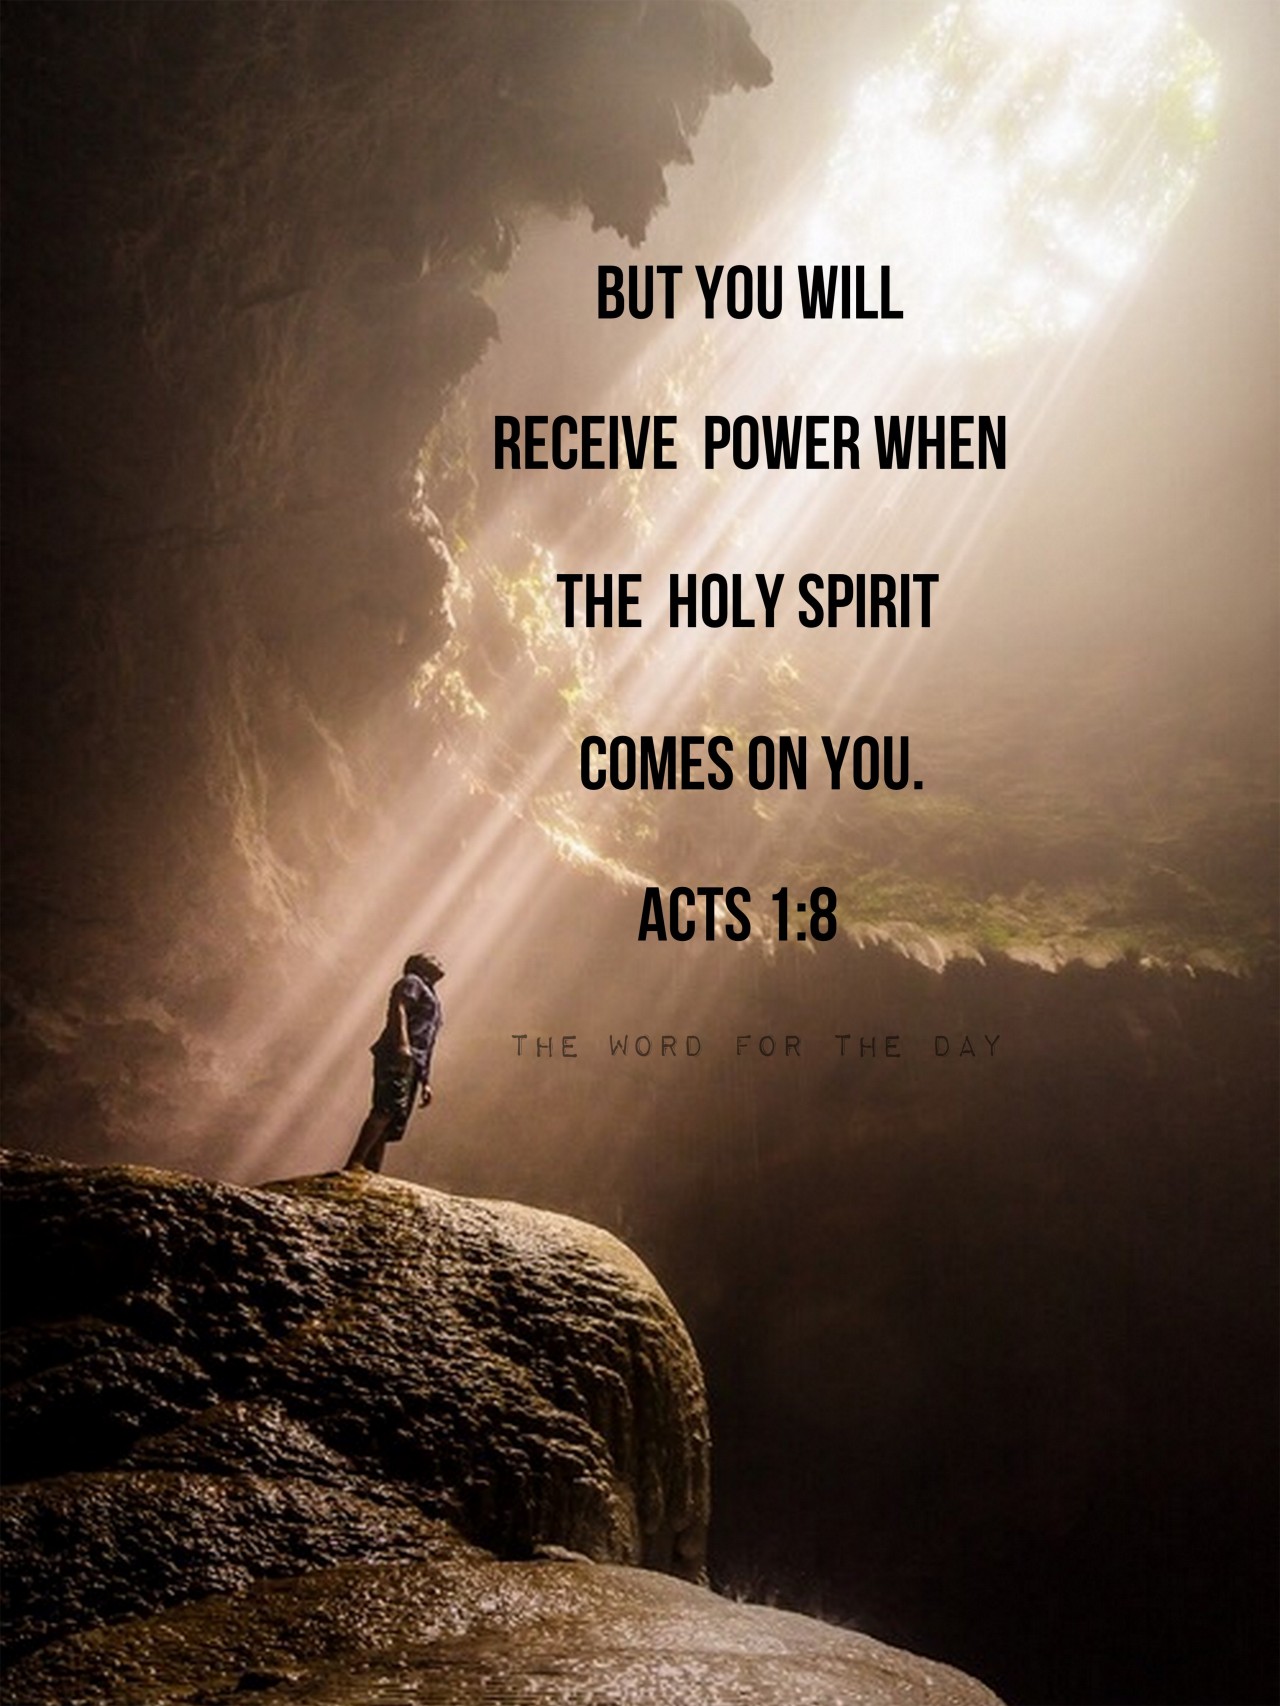 The Word For The Day • “You will receive power when the Holy Spirit